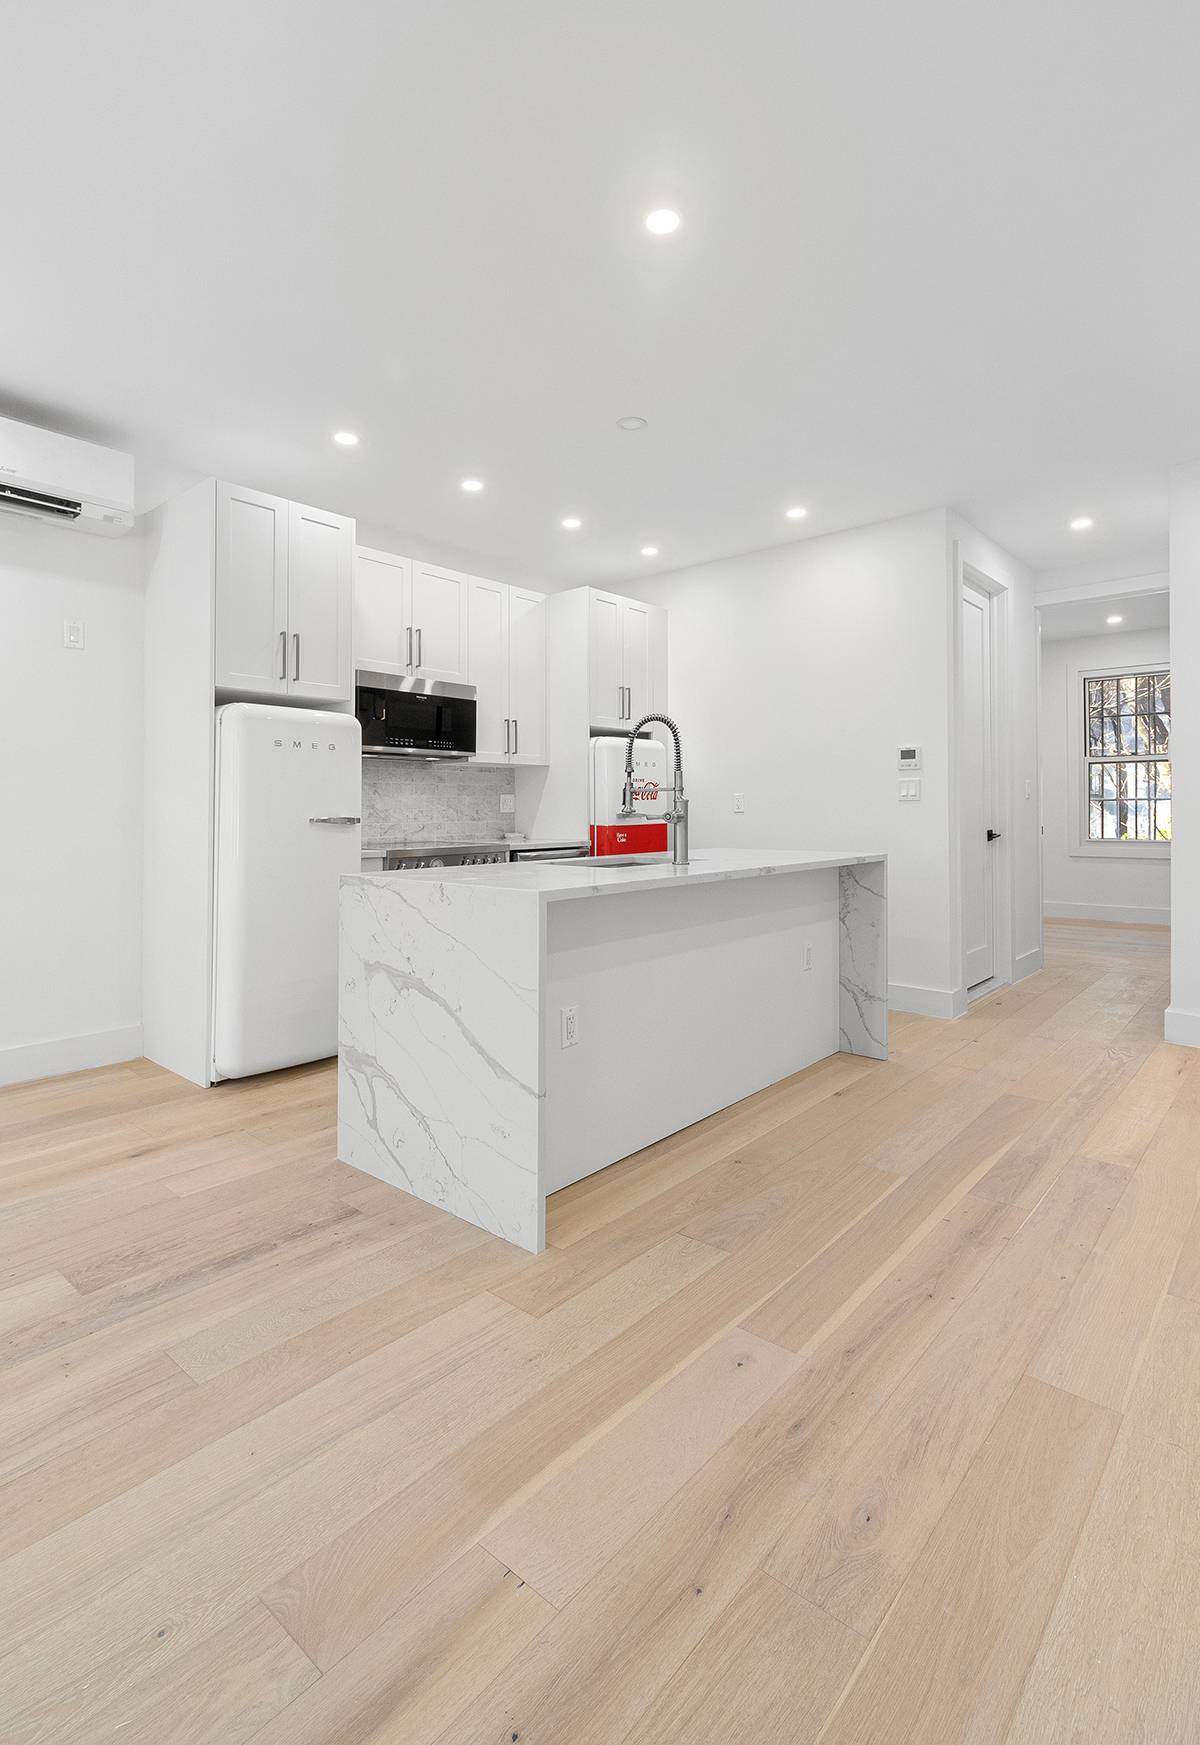 Welcome to this brand new, never been lived in, four bedroom, three bathroom townhouse, 2, 268 square feet located in the heart of the West Village, with private outdoor space ...